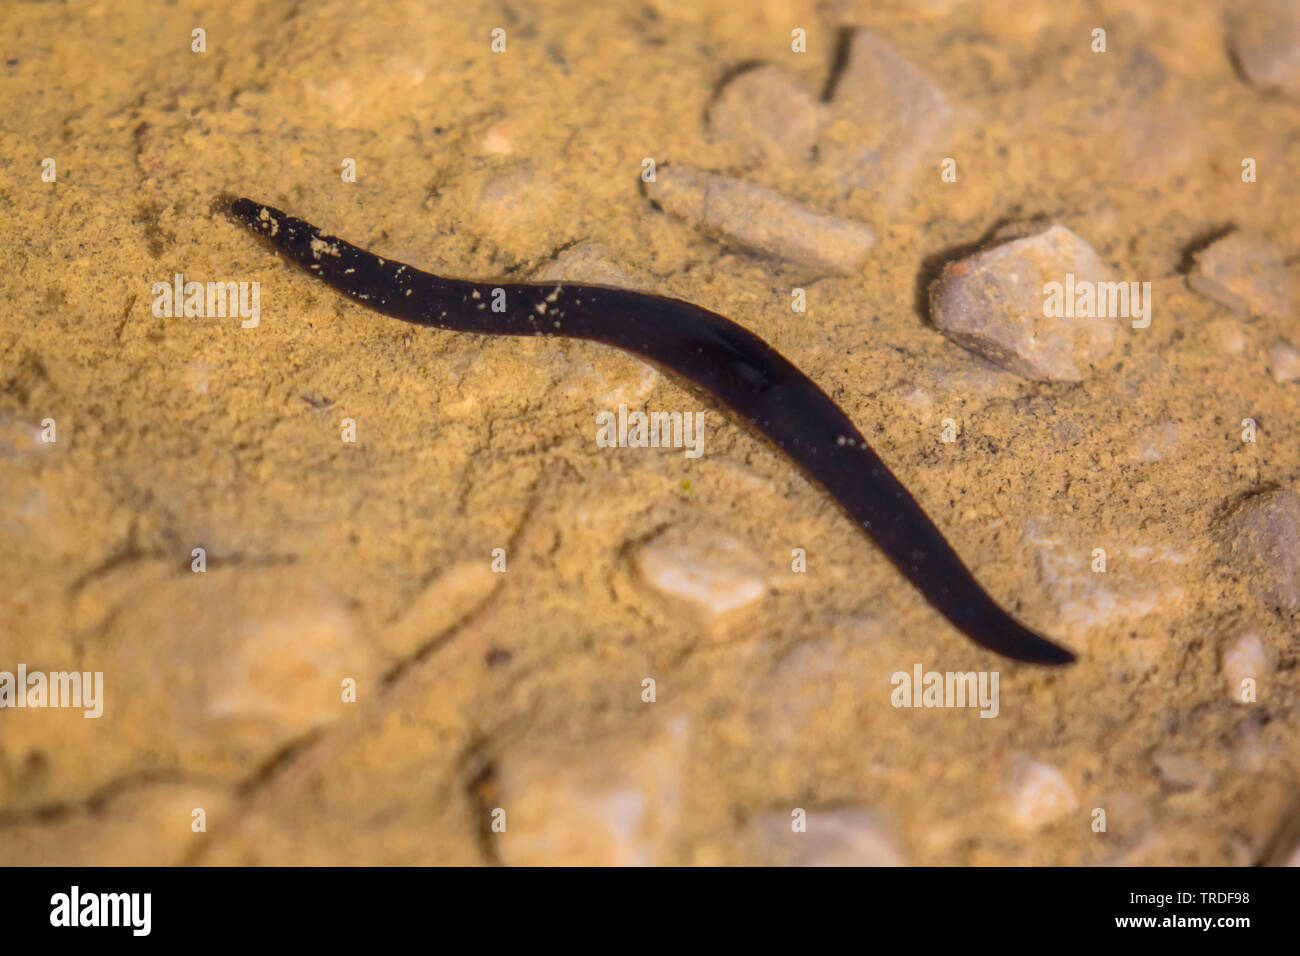 Biopharm (UK) which breeds European Medicinal Leeches with manager Carl  Peters Stock Photo - Alamy